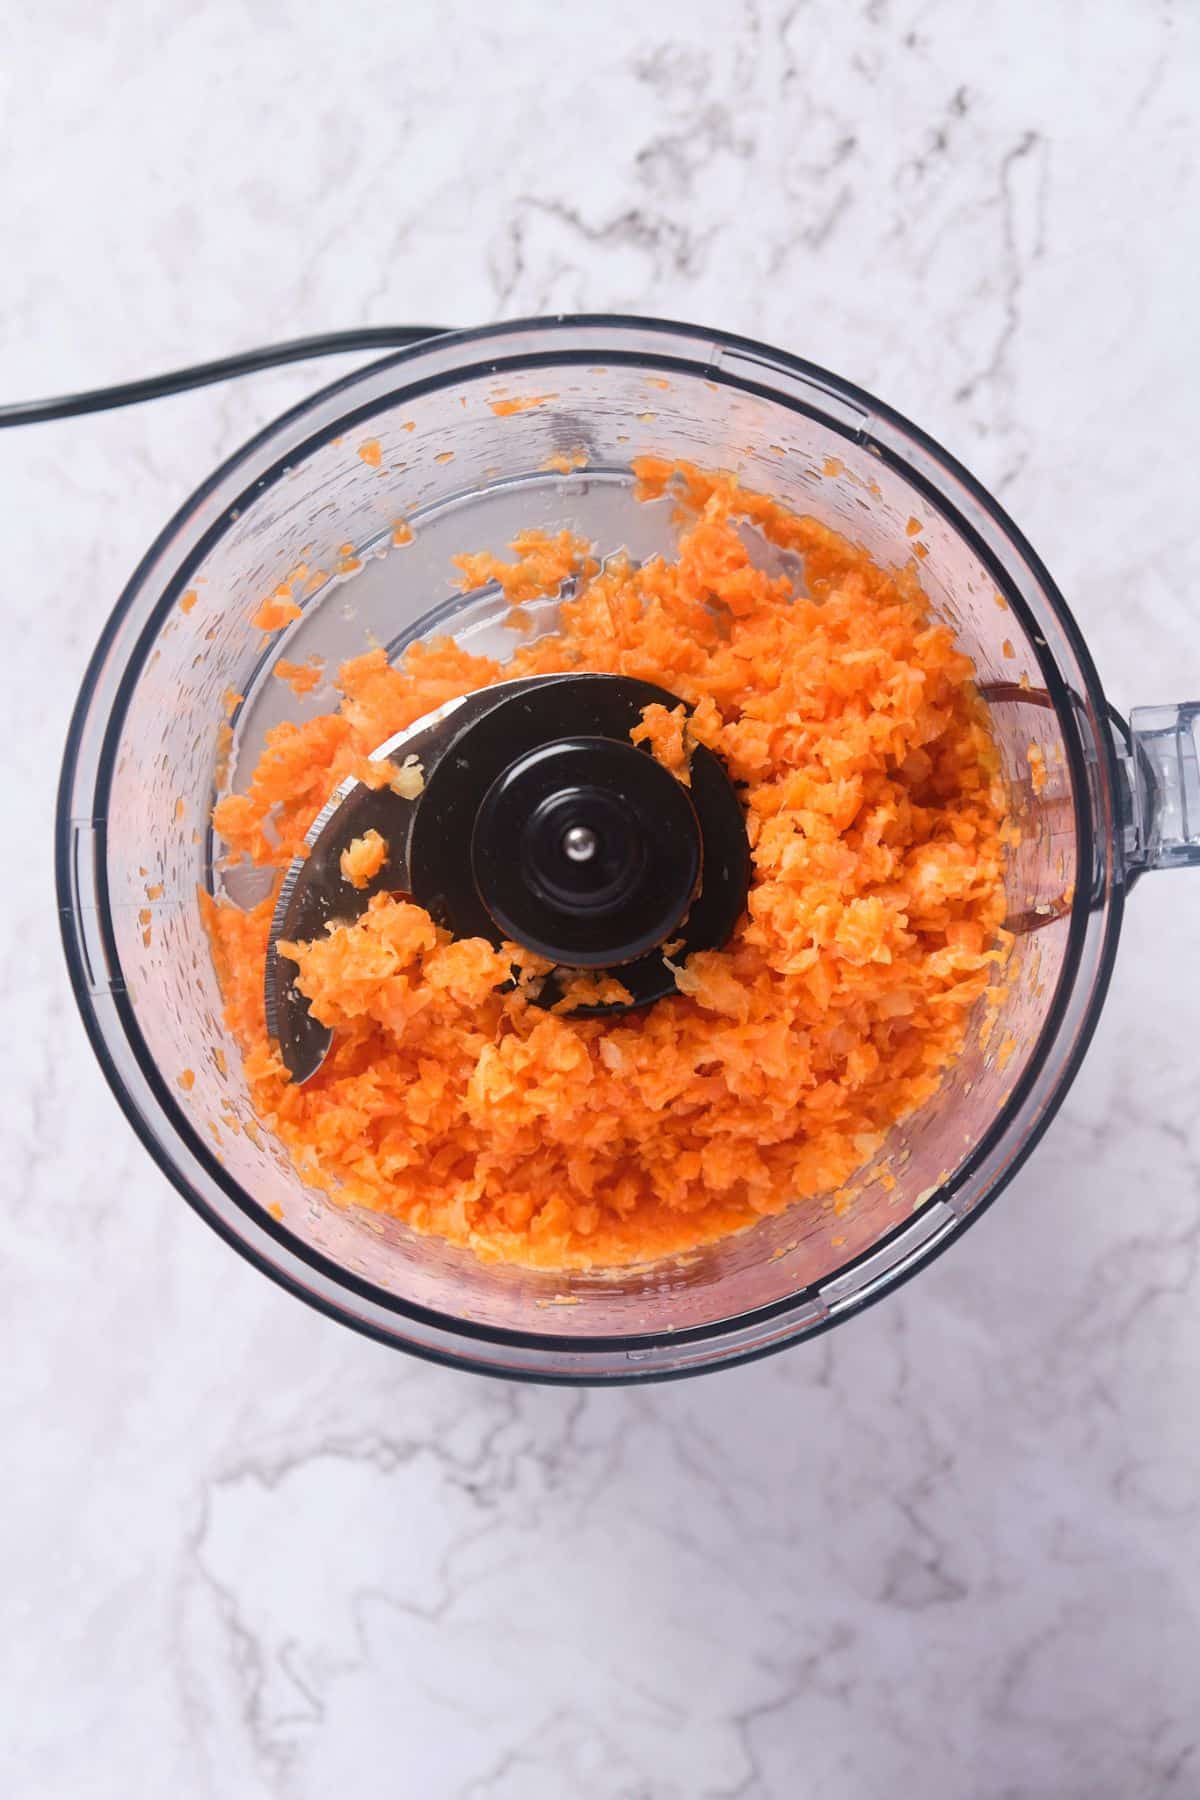 mini carrots and crushed pineapple being processed in a food processor.